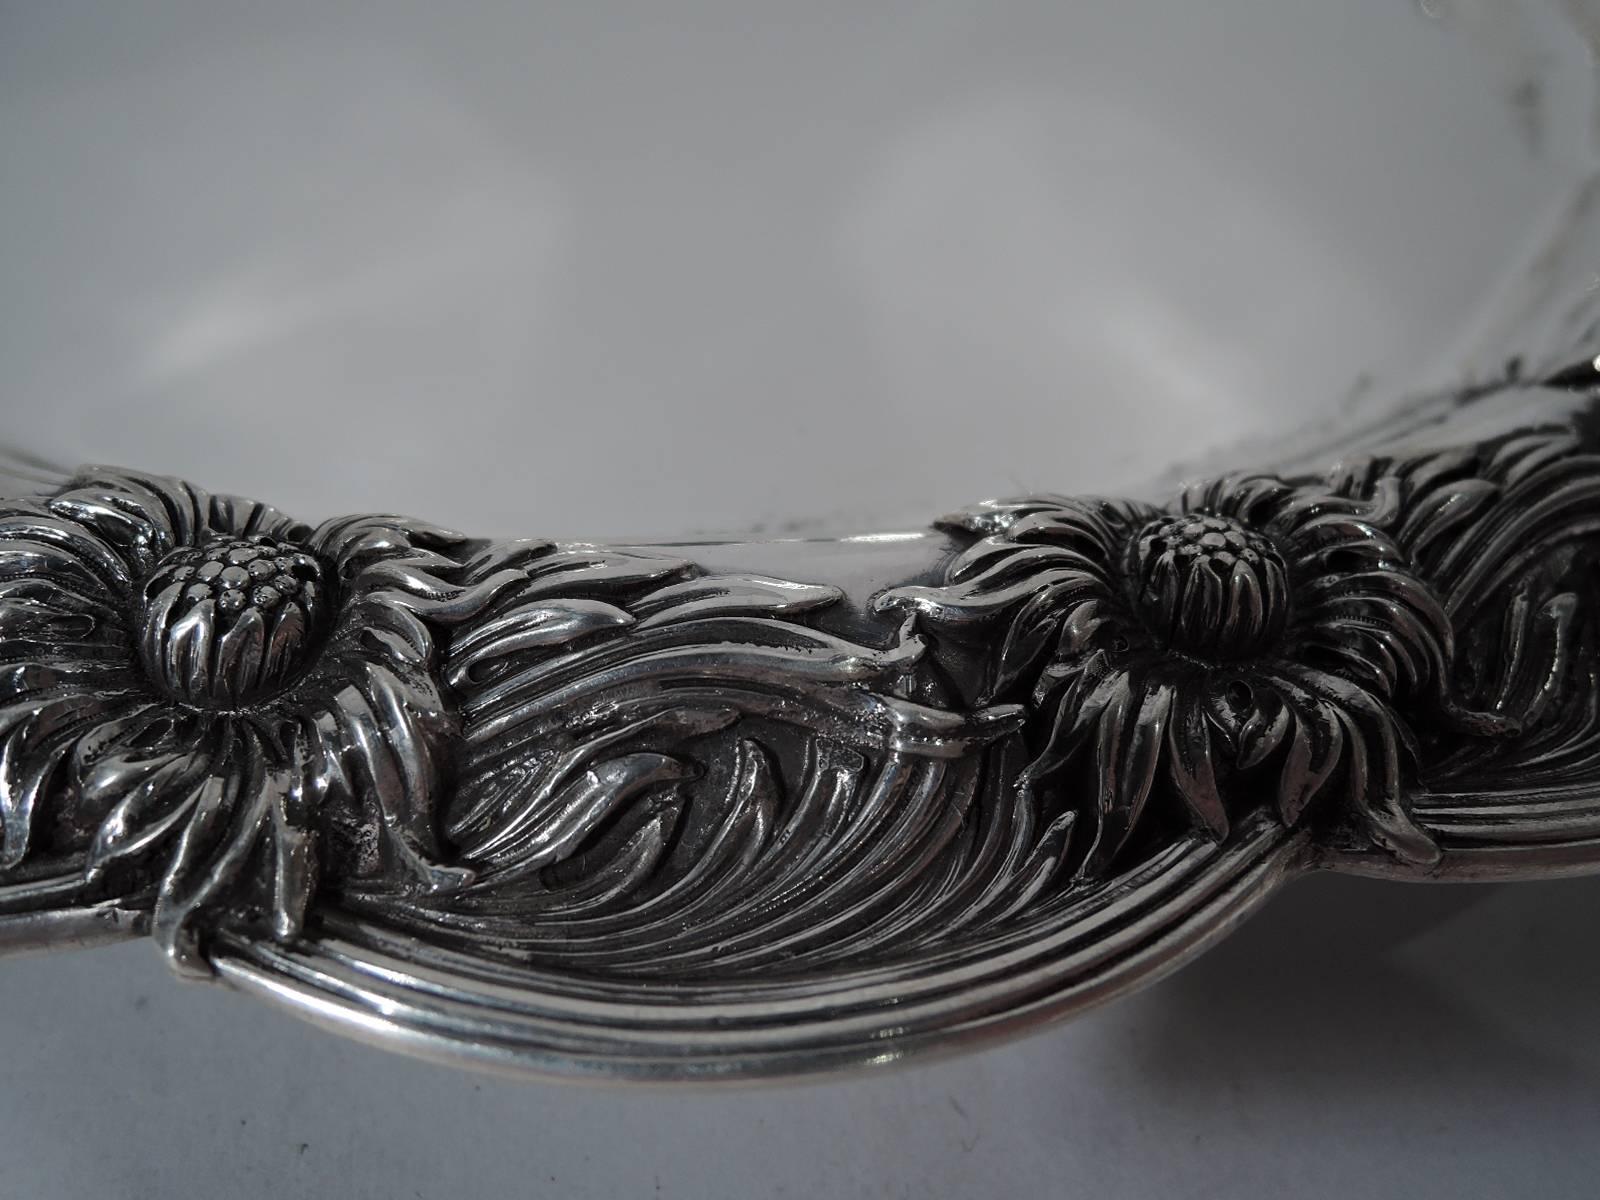 American Antique Japonesque Chrysanthemum Sterling Silver Tray by Tiffany